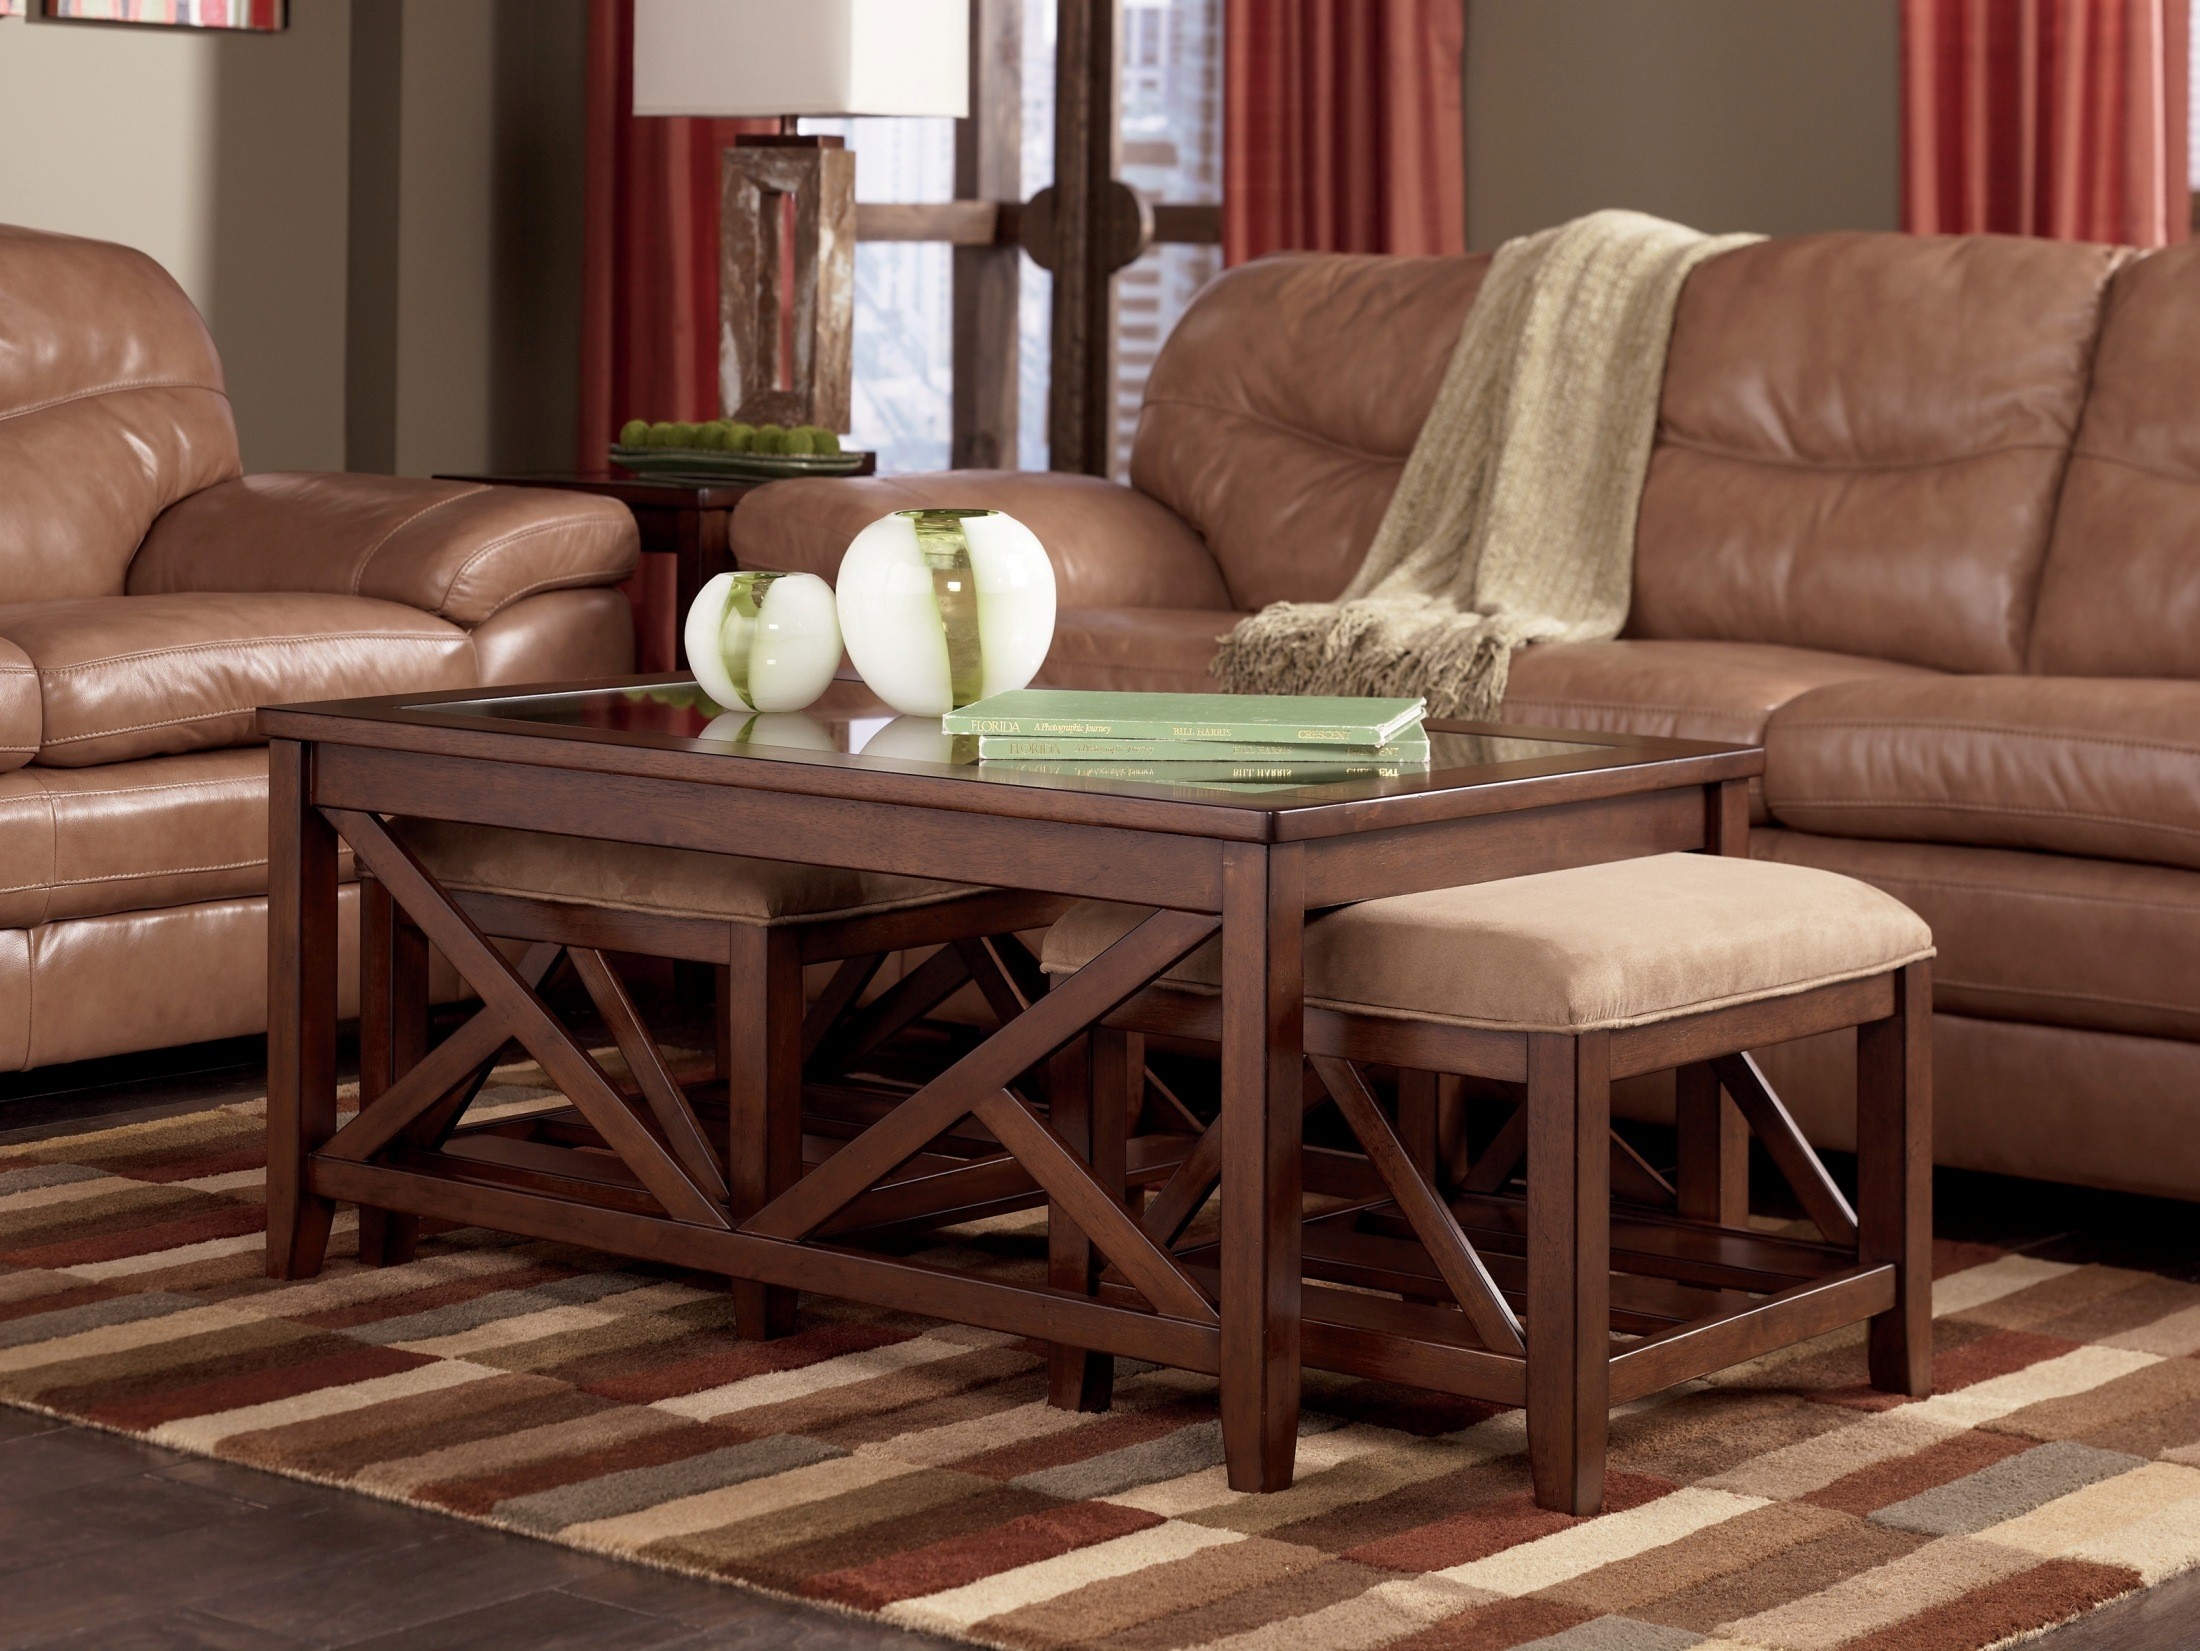 Coffee table with nesting ottomans 4